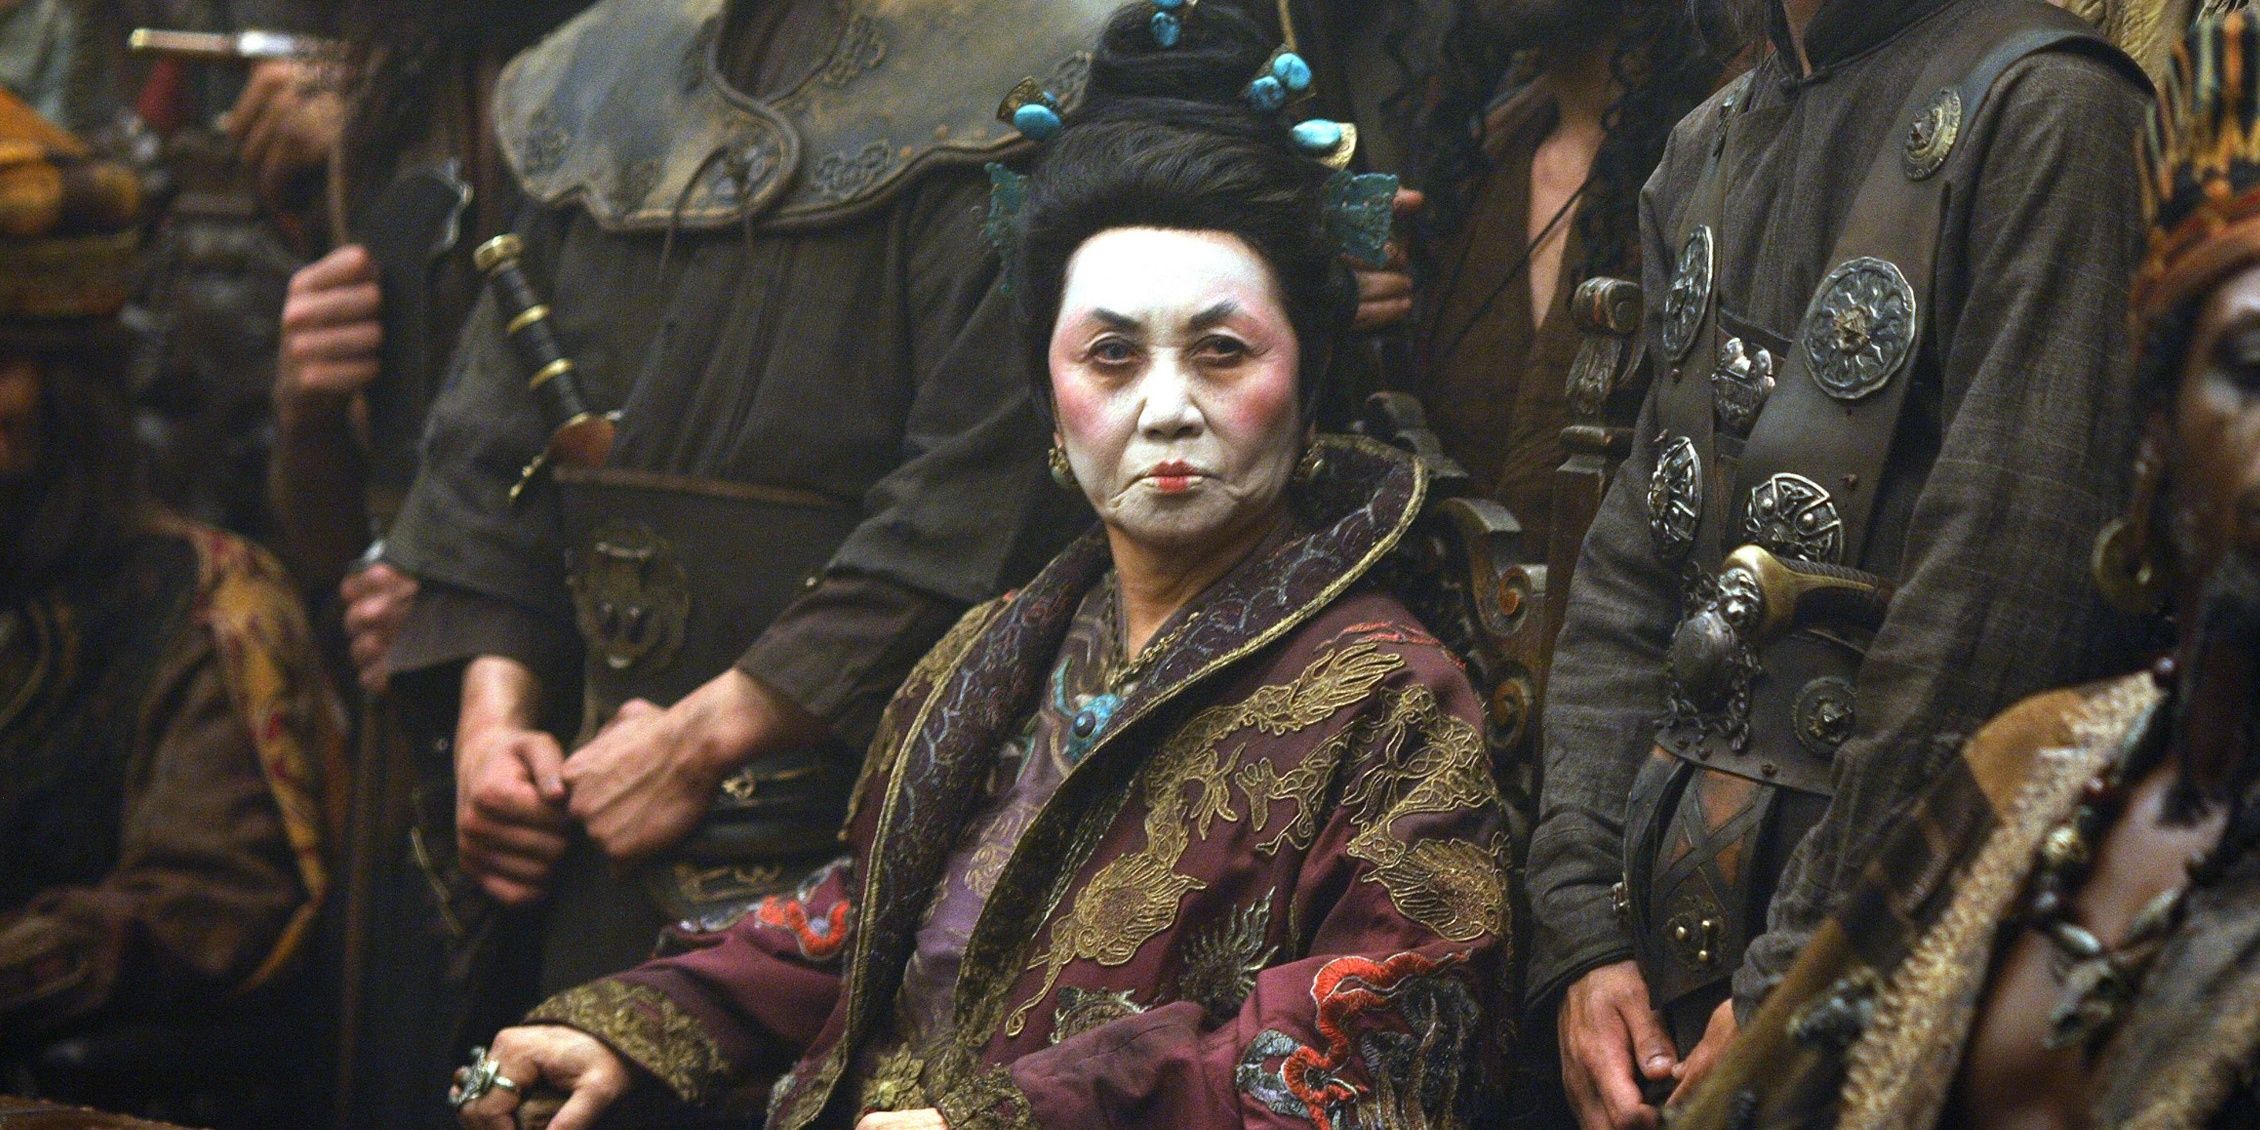 Mistress Ching seated in the Brethren Court in Pirates of the Caribbean